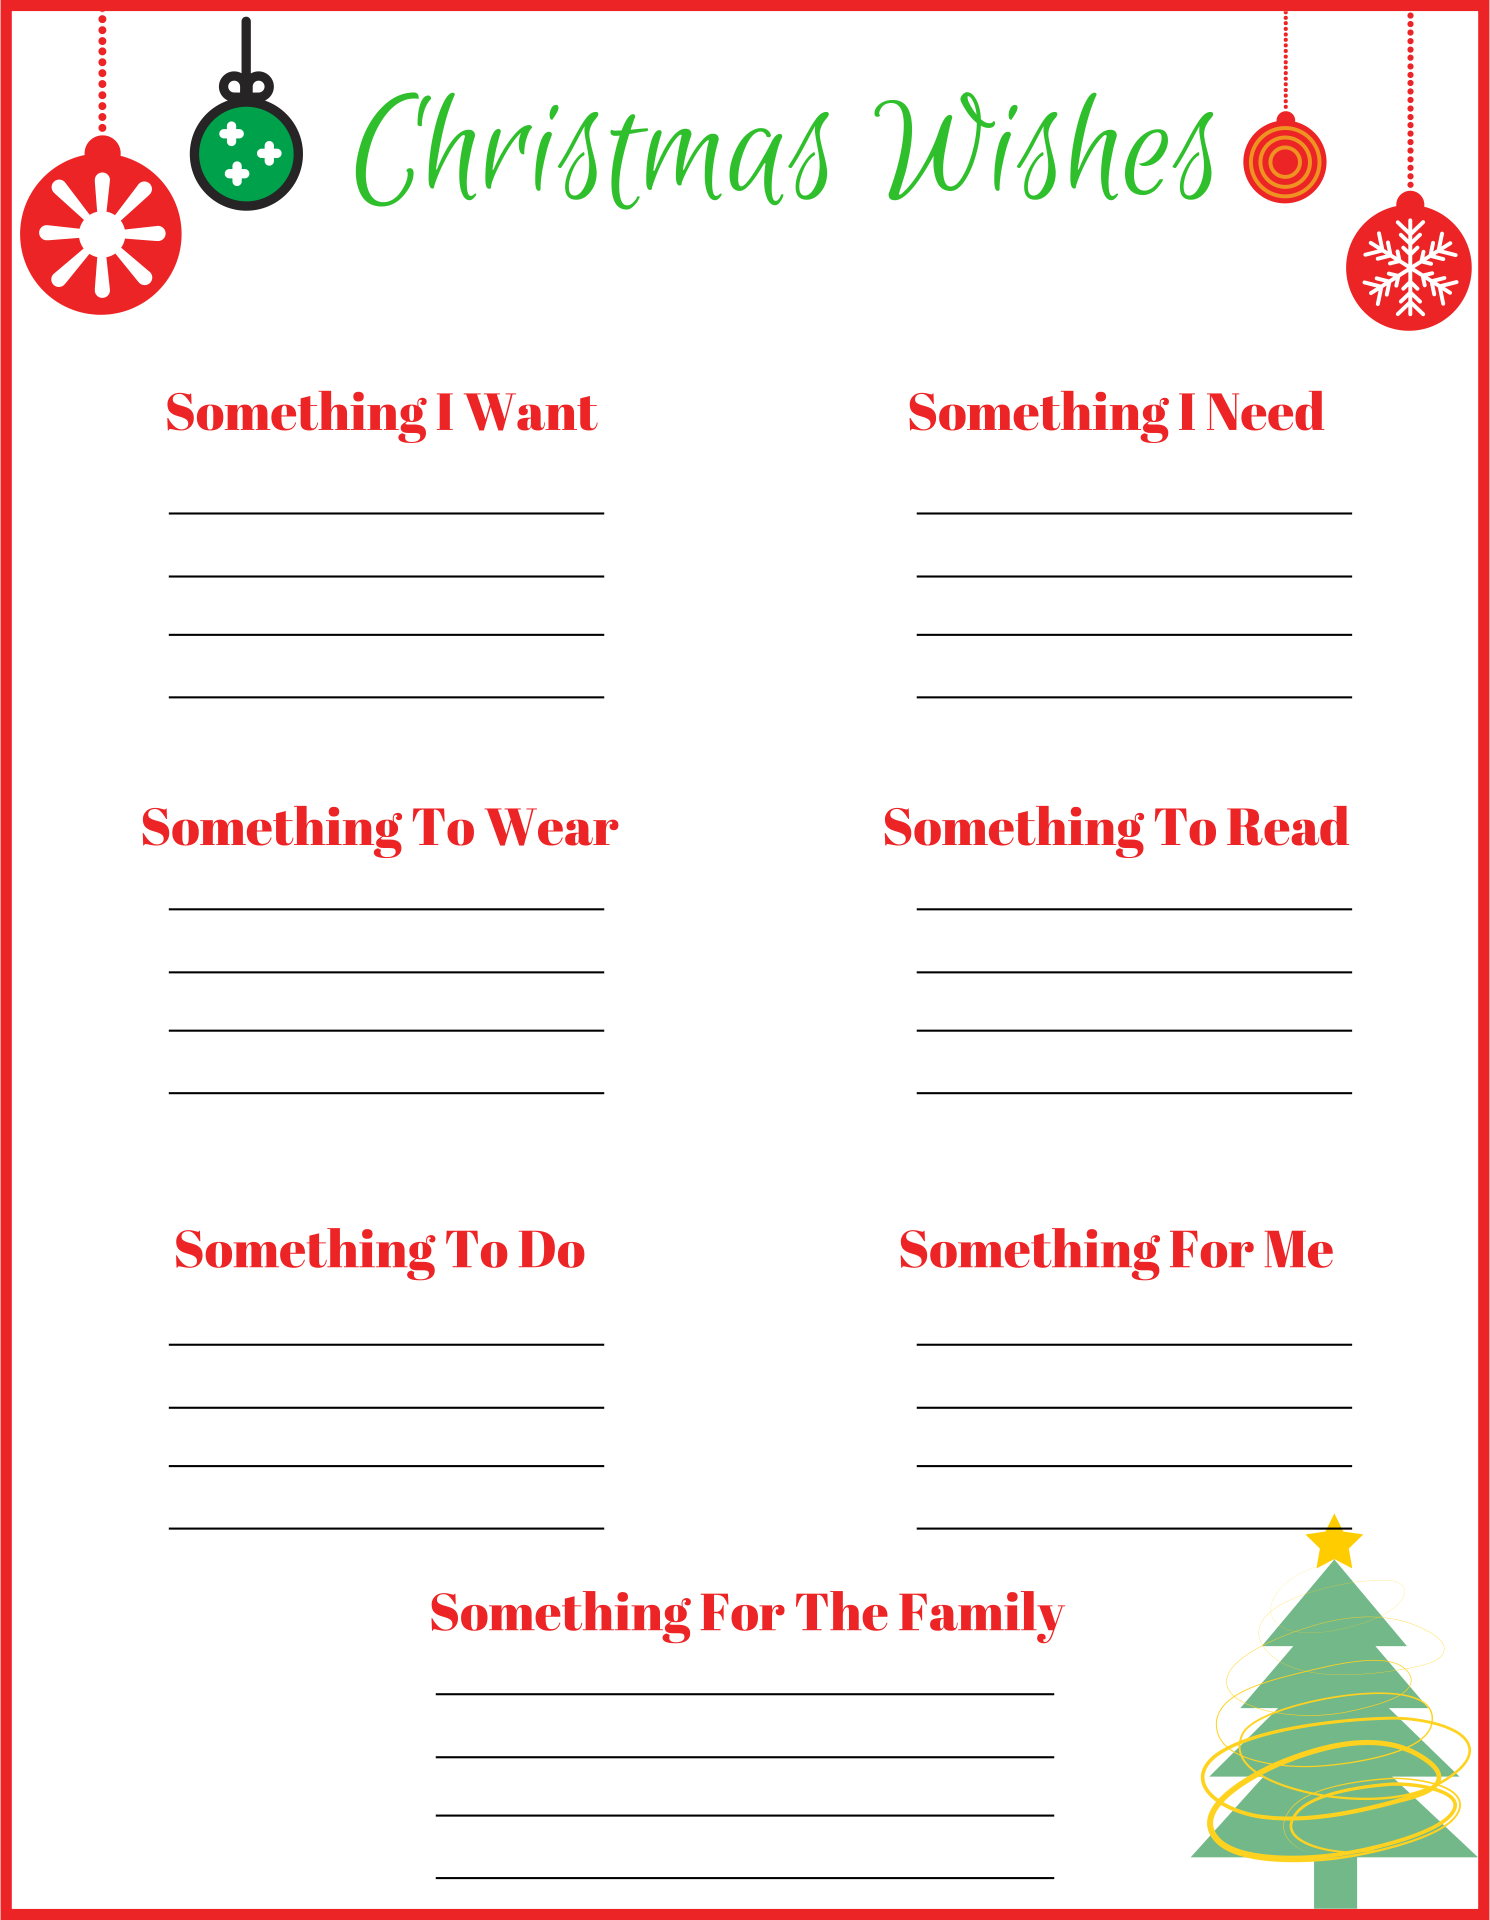 5-best-images-of-blank-christmas-wish-list-printable-printable-christmas-wish-list-paper